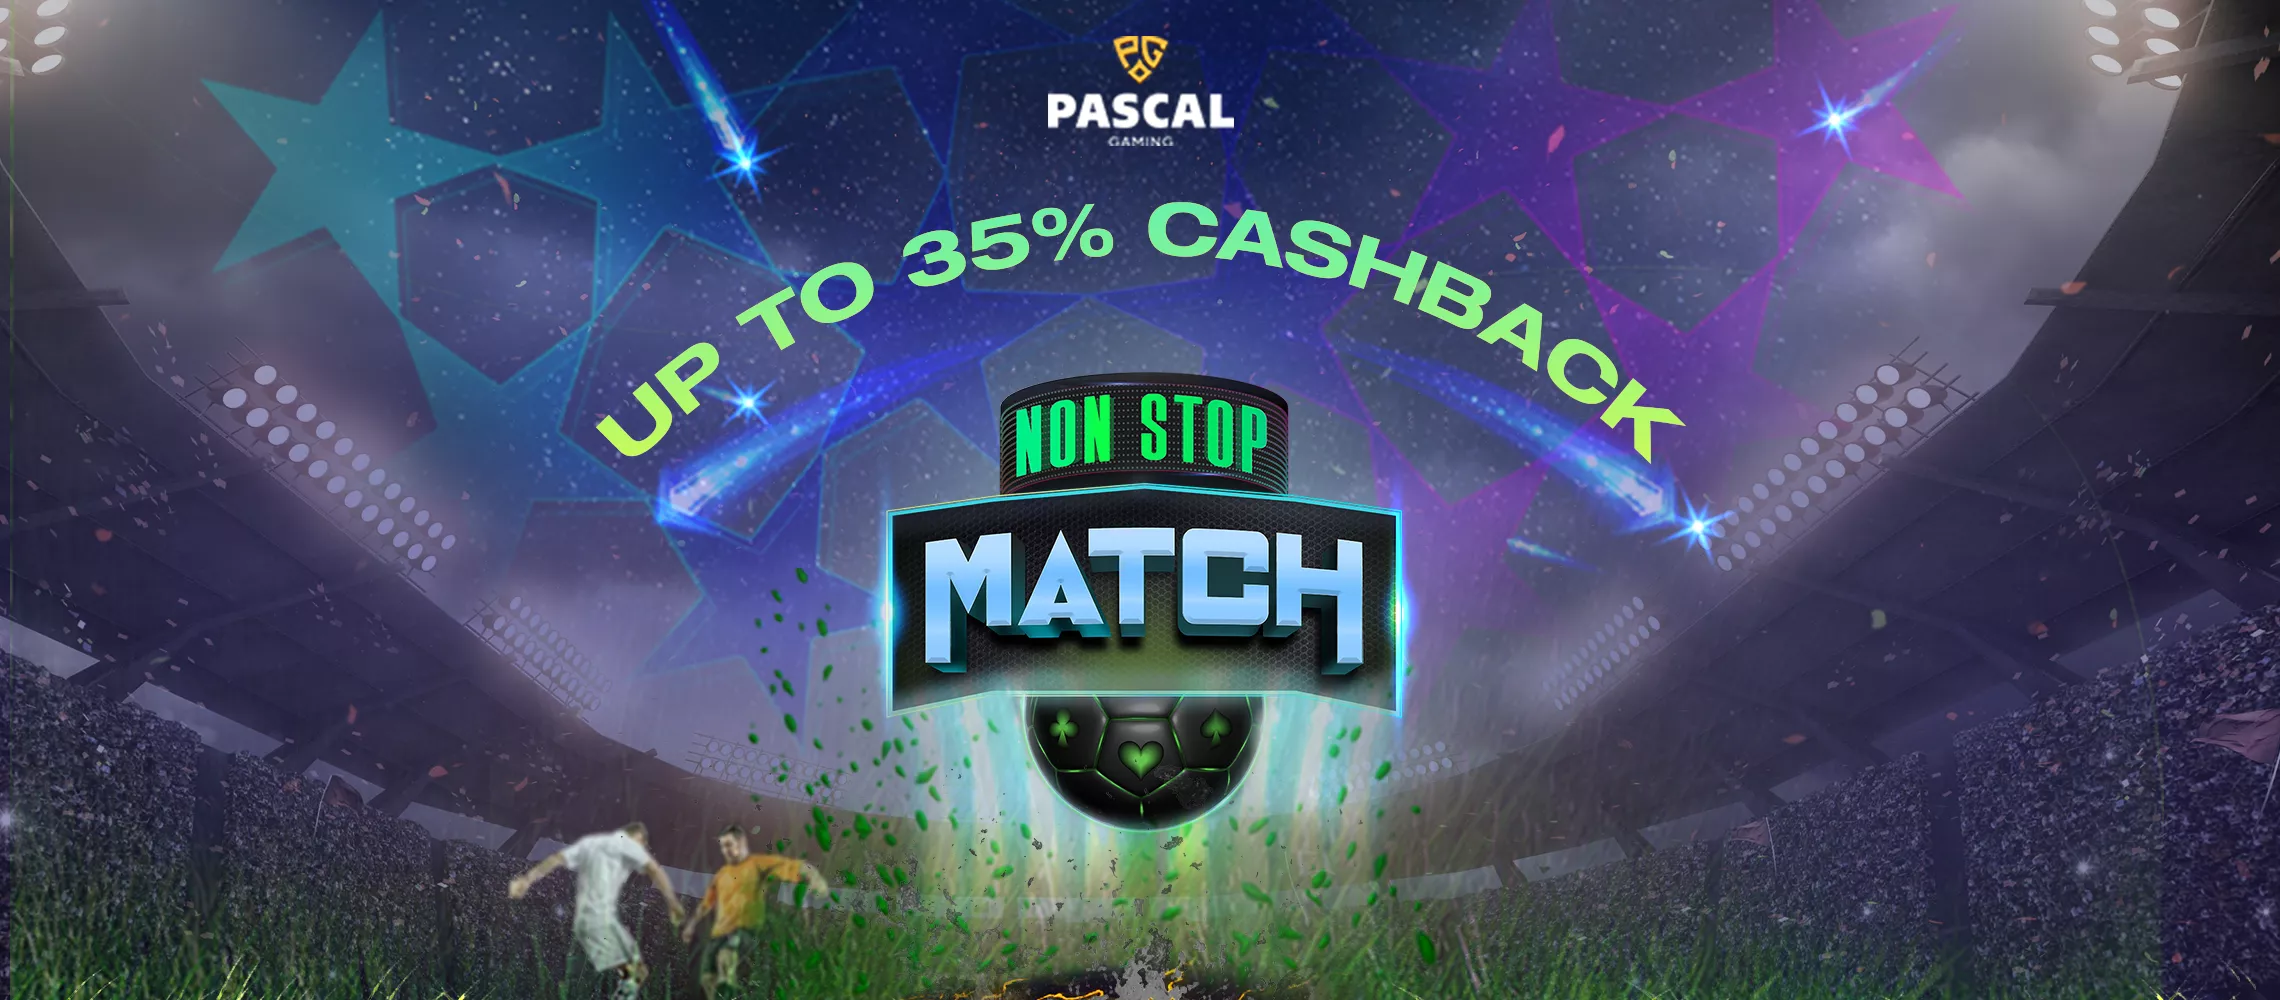 A New Cashback Feature Added To The Non-Stop Match Game